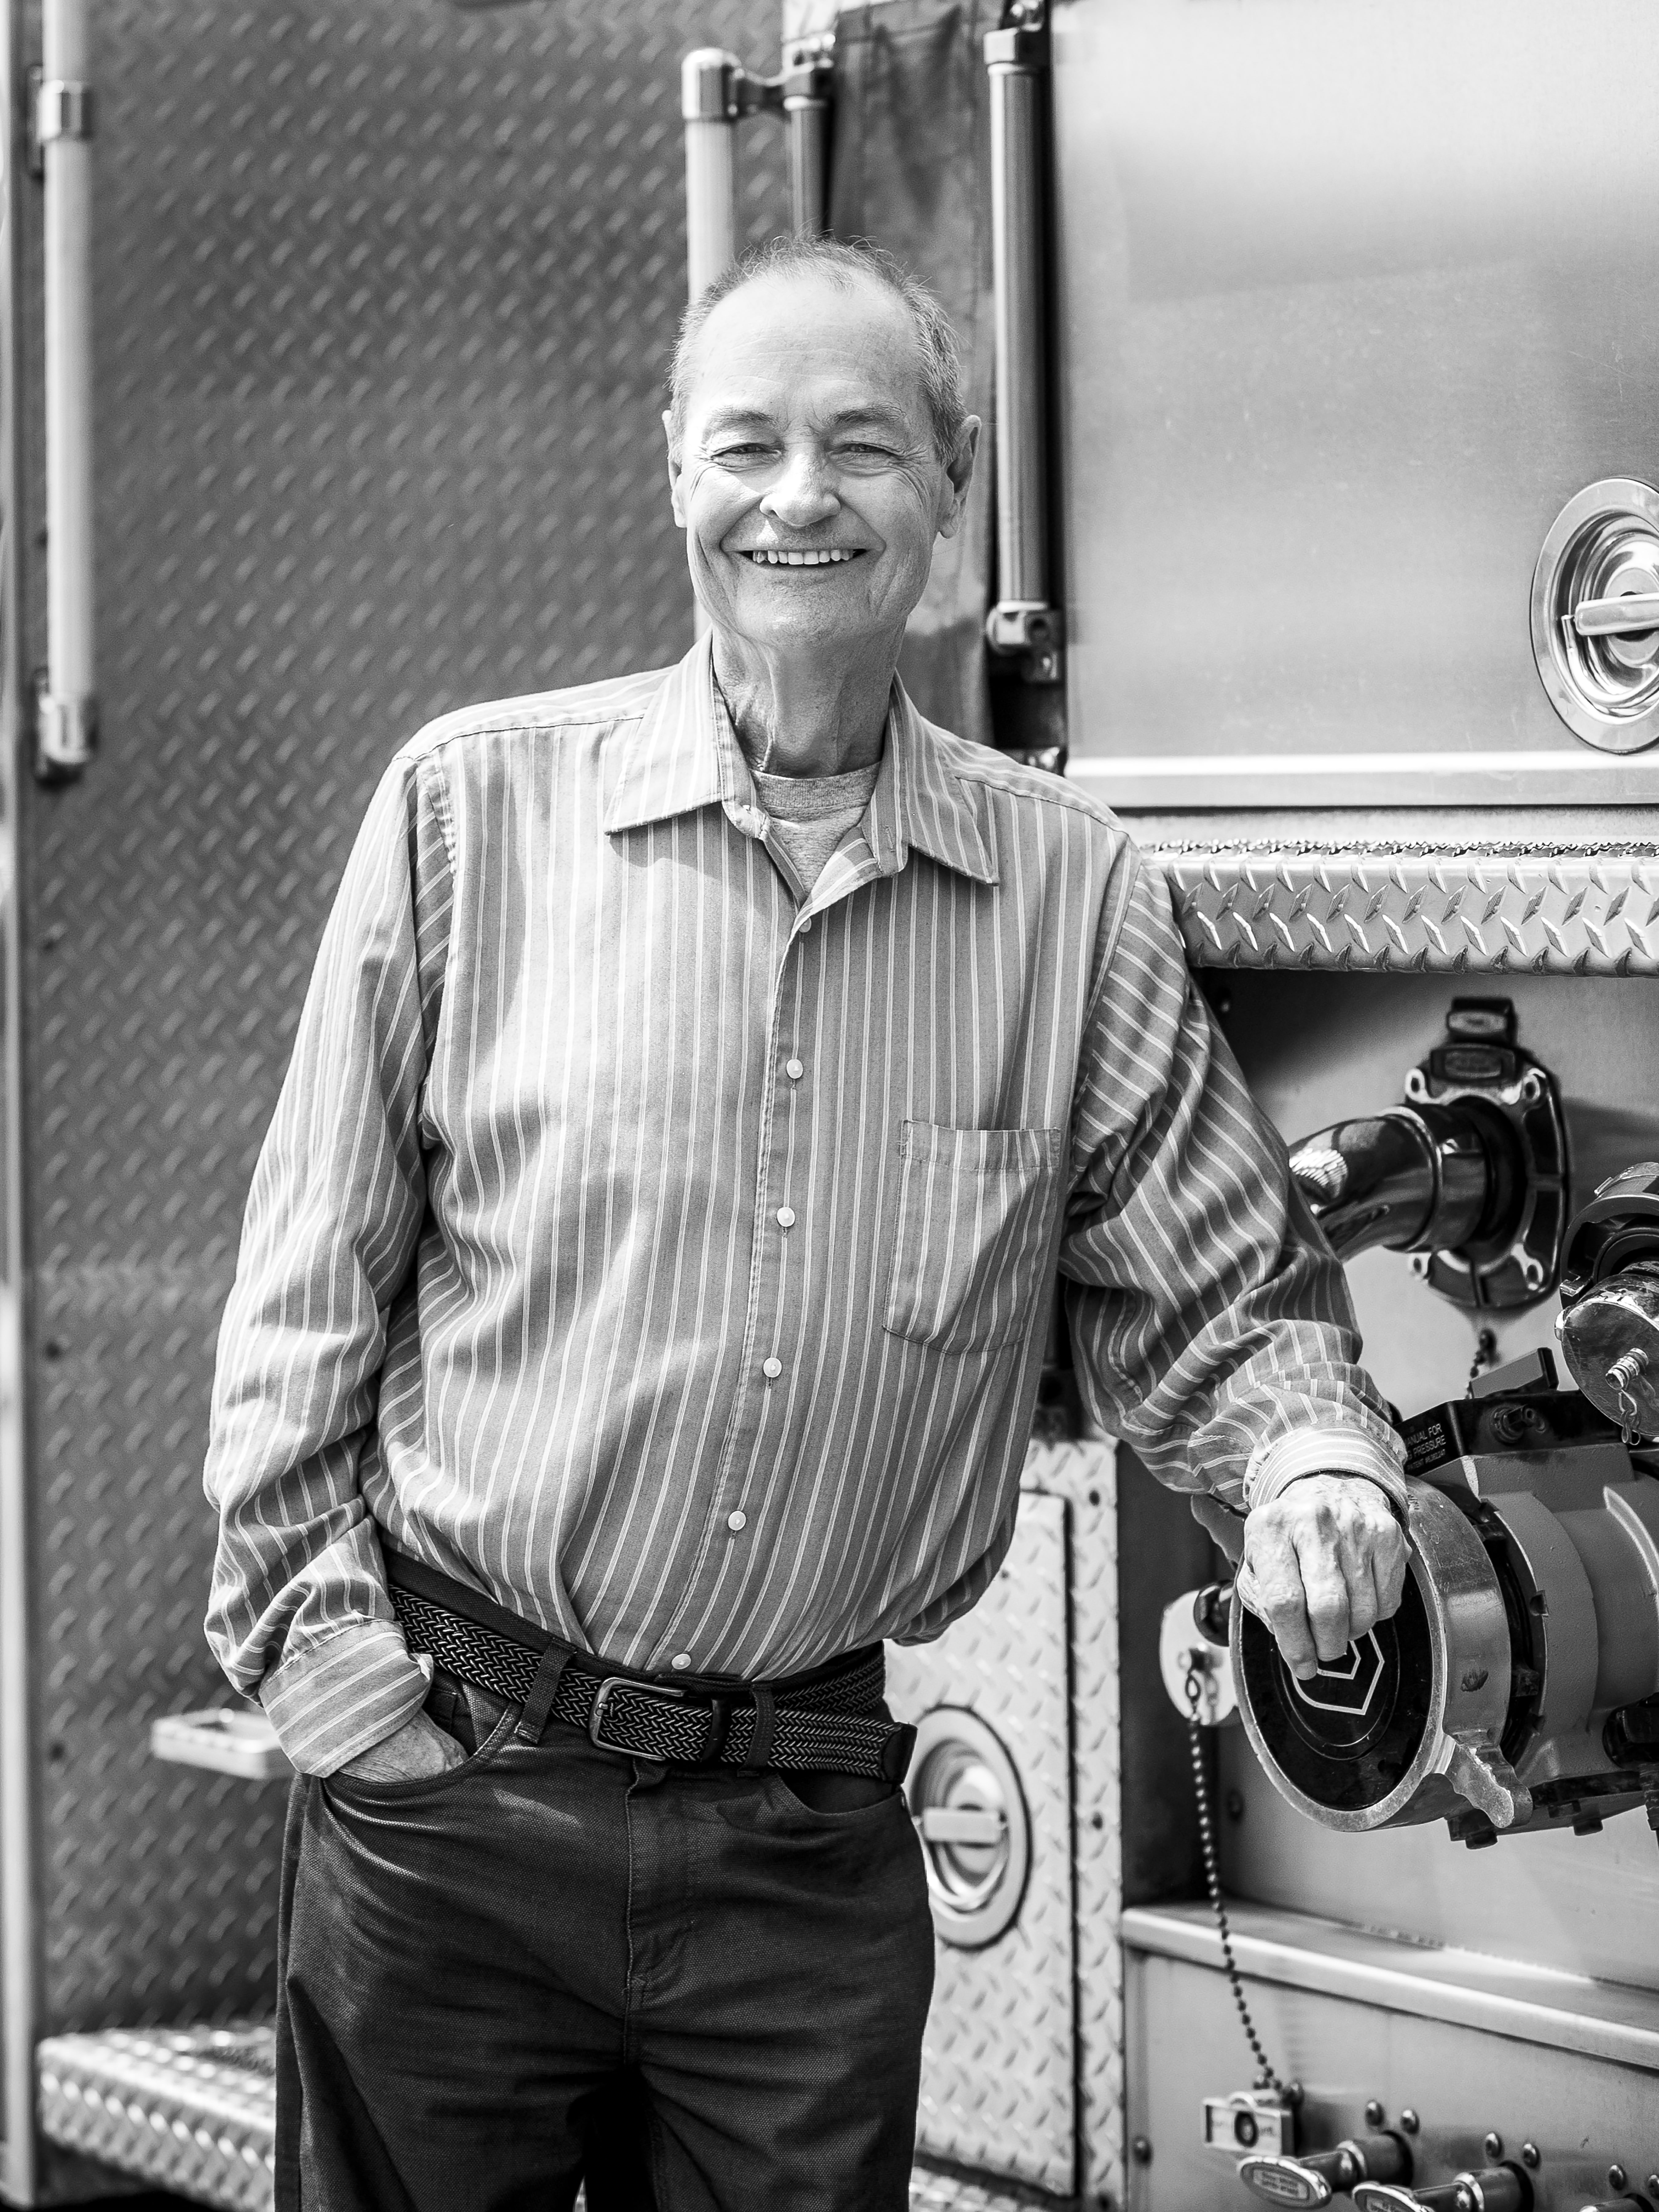 Ron Seanor black and white portrait posing with a firetruck